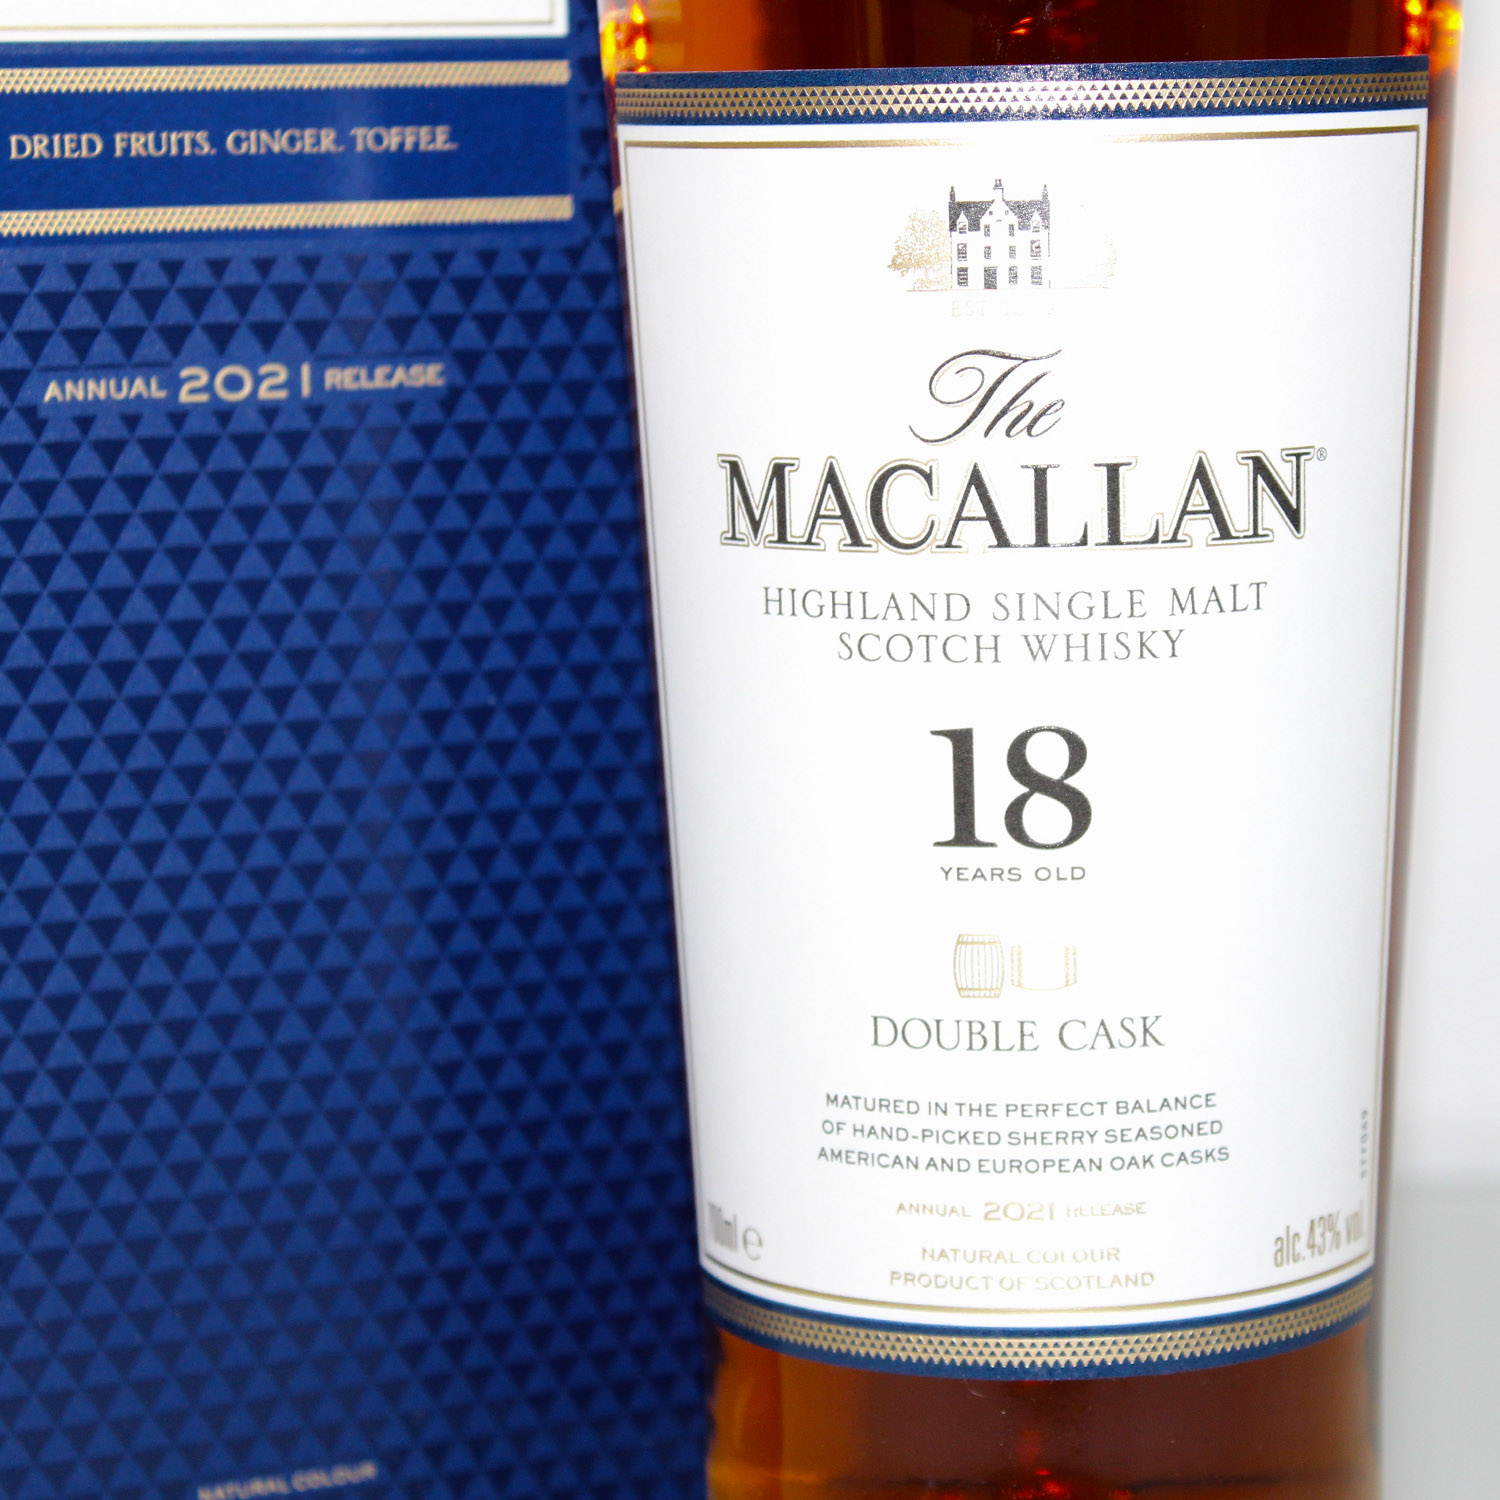 Macallan Annual 2021 Release 18 Years Label